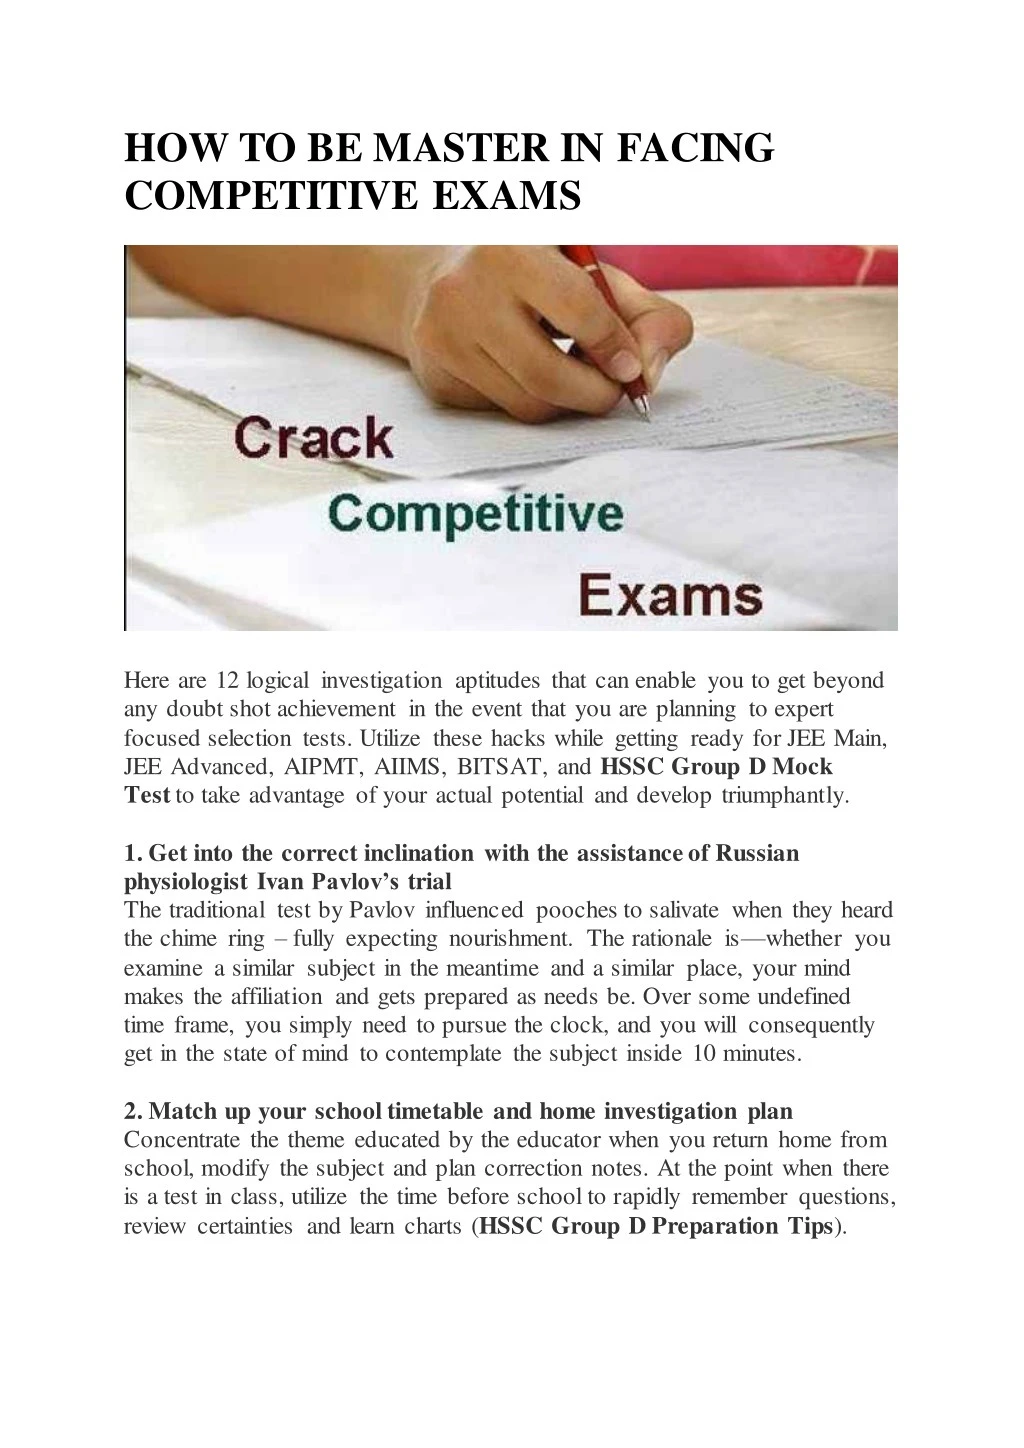 how to be master in facing competitive exams